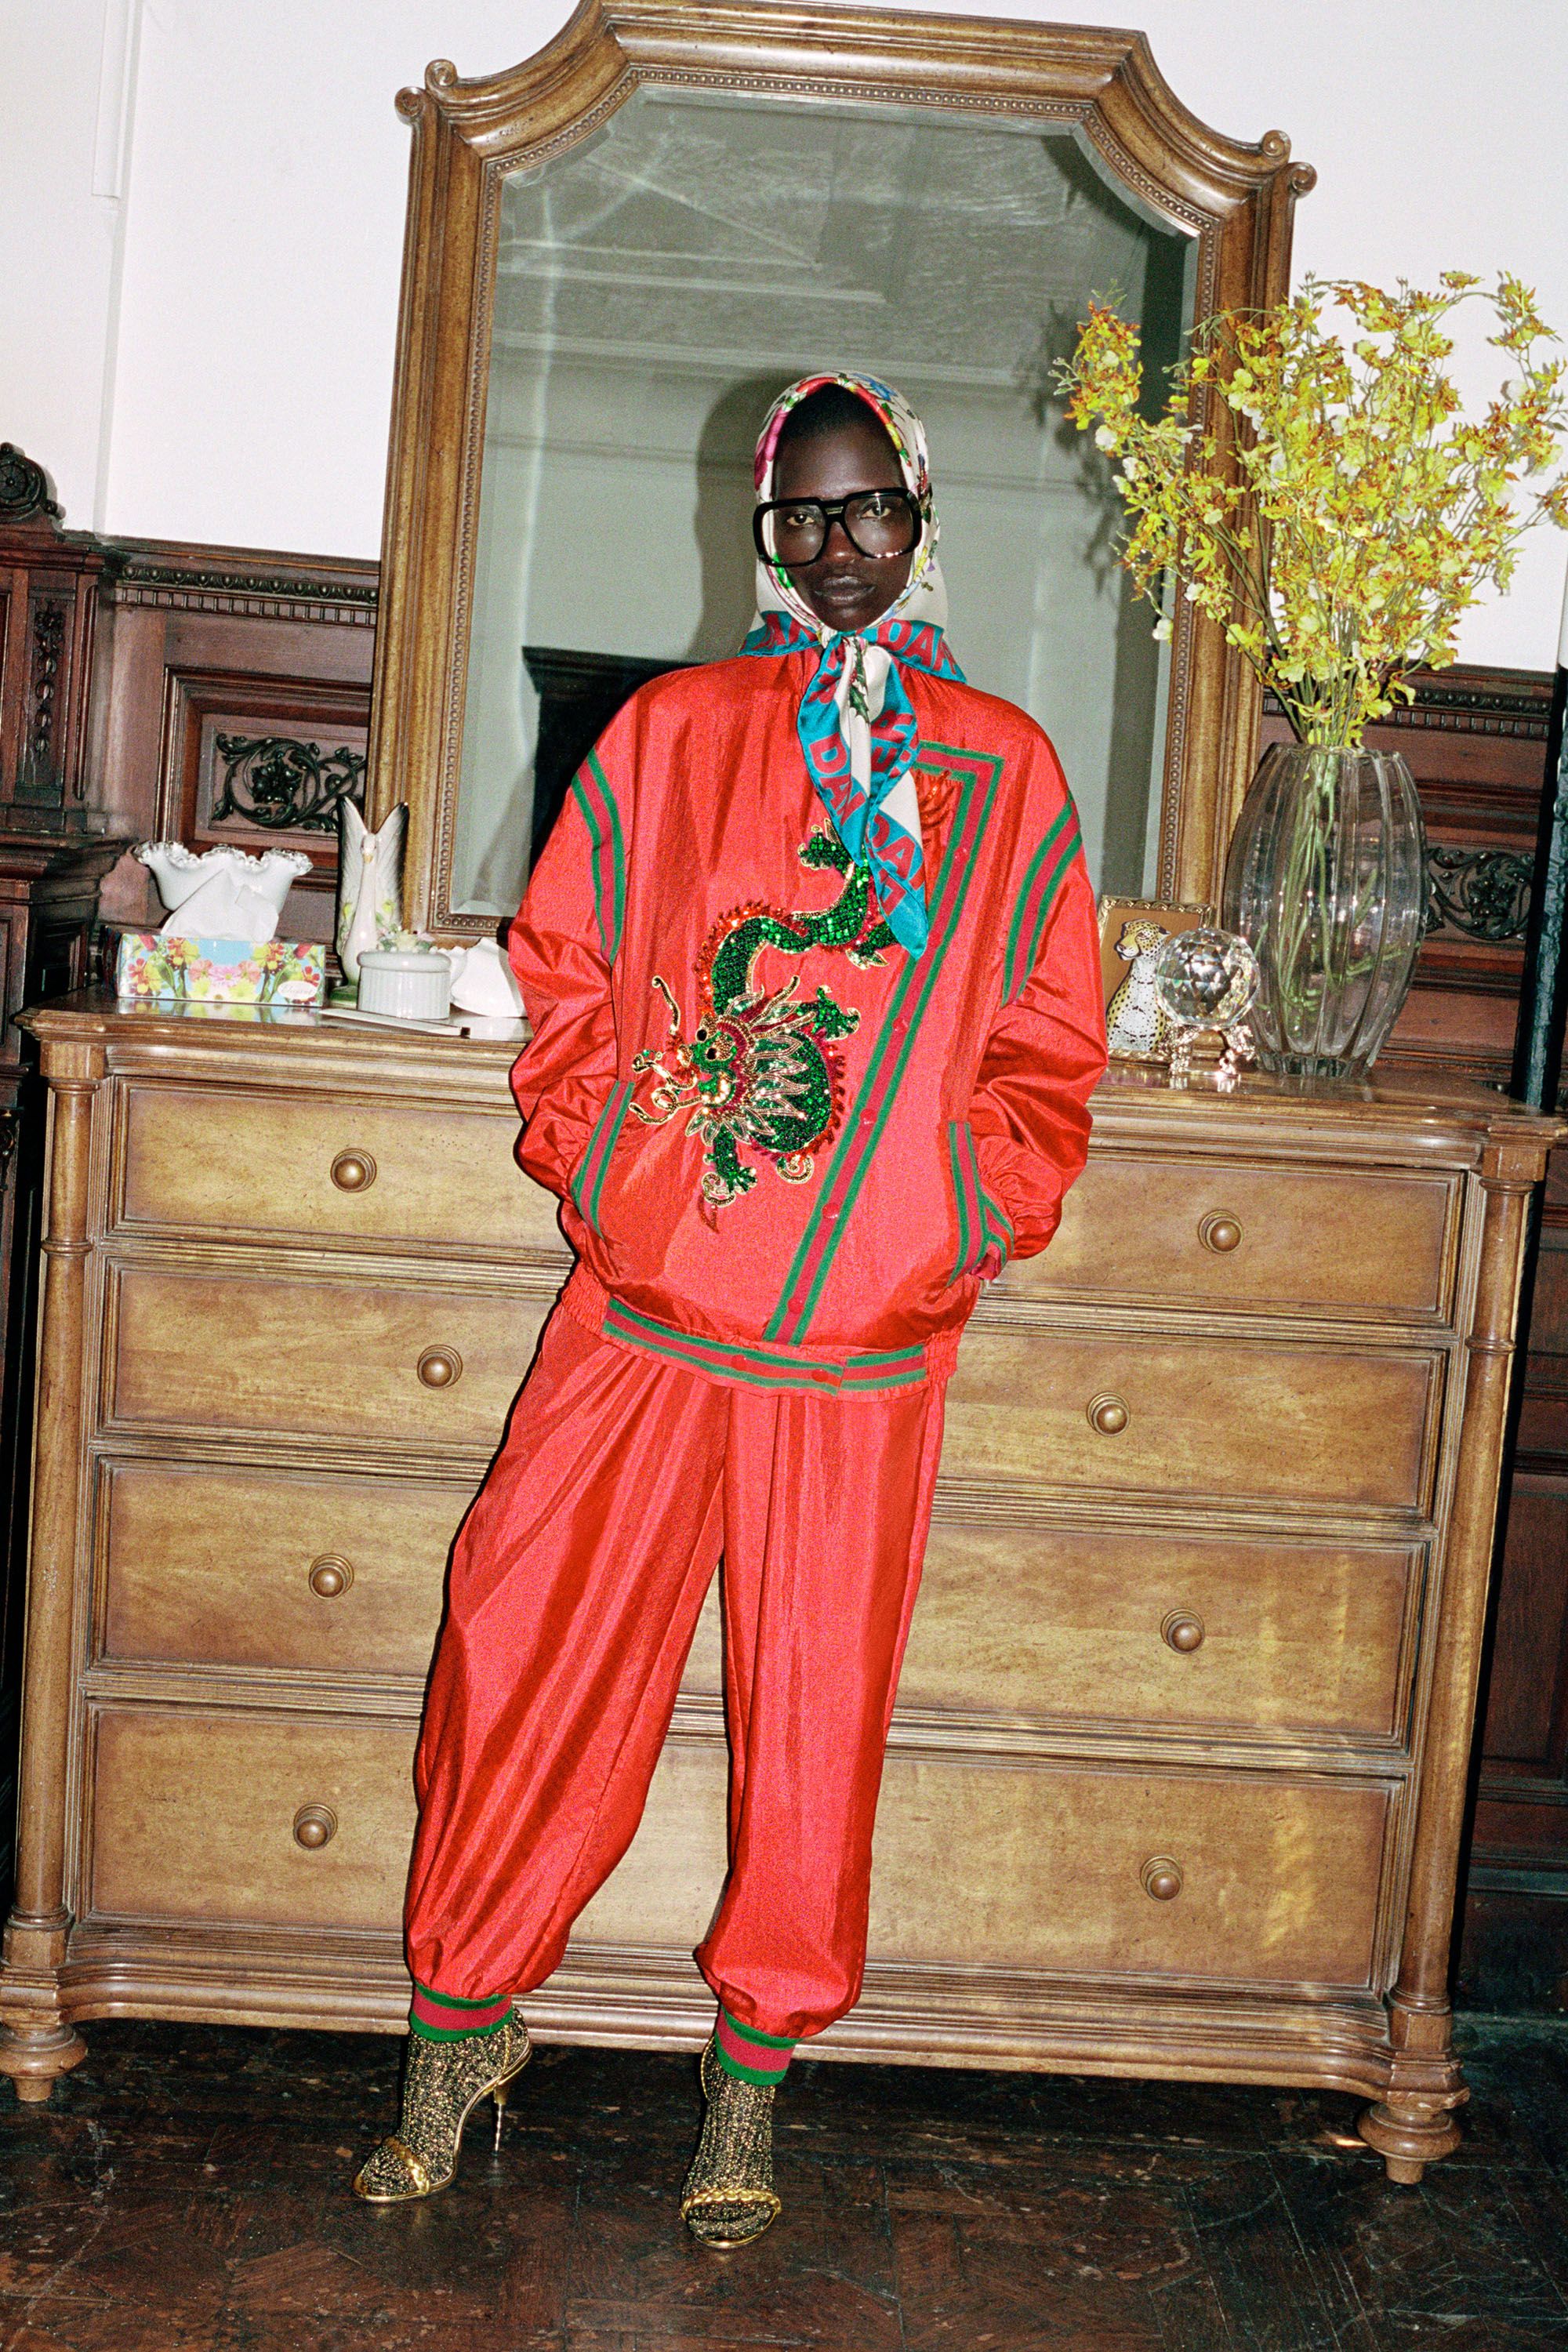 Gucci and Dapper Dan's First Collection Is Here and It's Really Good